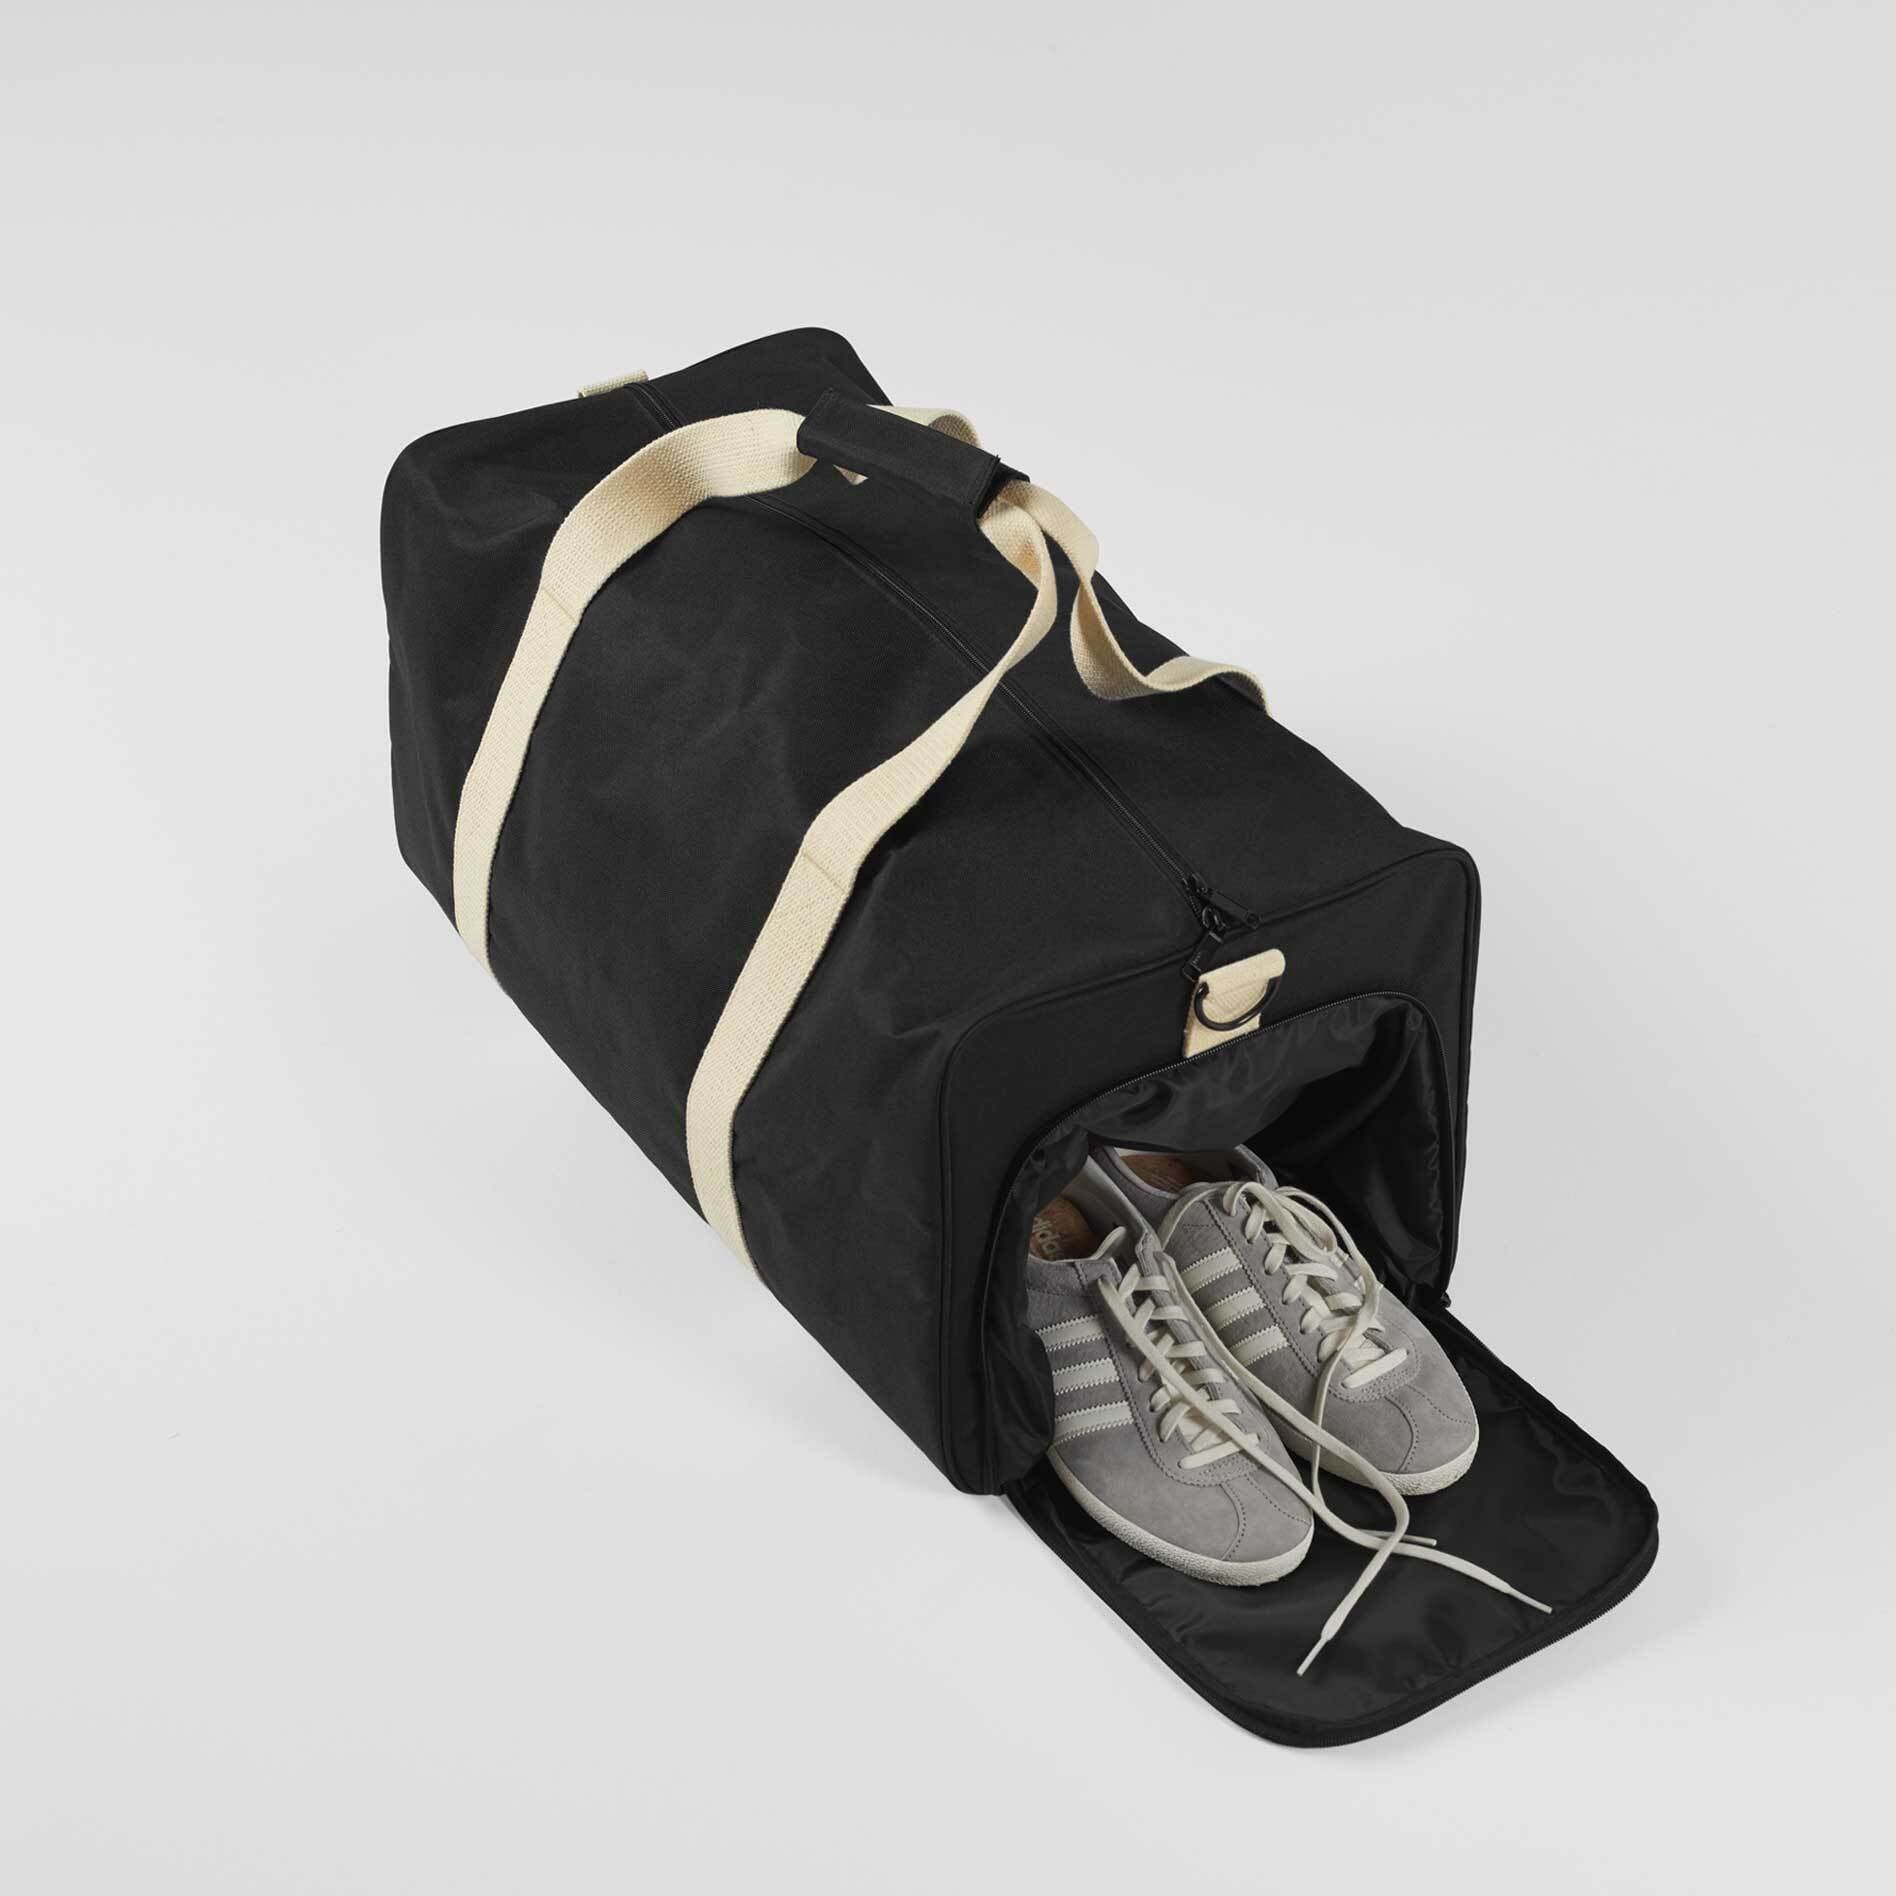 Meet our Travel Duffle Bag - the ultimate road trip companion! Made from 100% recycled polyester, this durable bag (28cm x 28cm x 58cm) features a signature shoe compartment for smart organization. With inner zip pockets, an external shoe compartment, and reliable YKK zips, travel hassle-free. Go eco-friendly without compromise. Get your versatile, eco-conscious Travel Duffle Bag today!